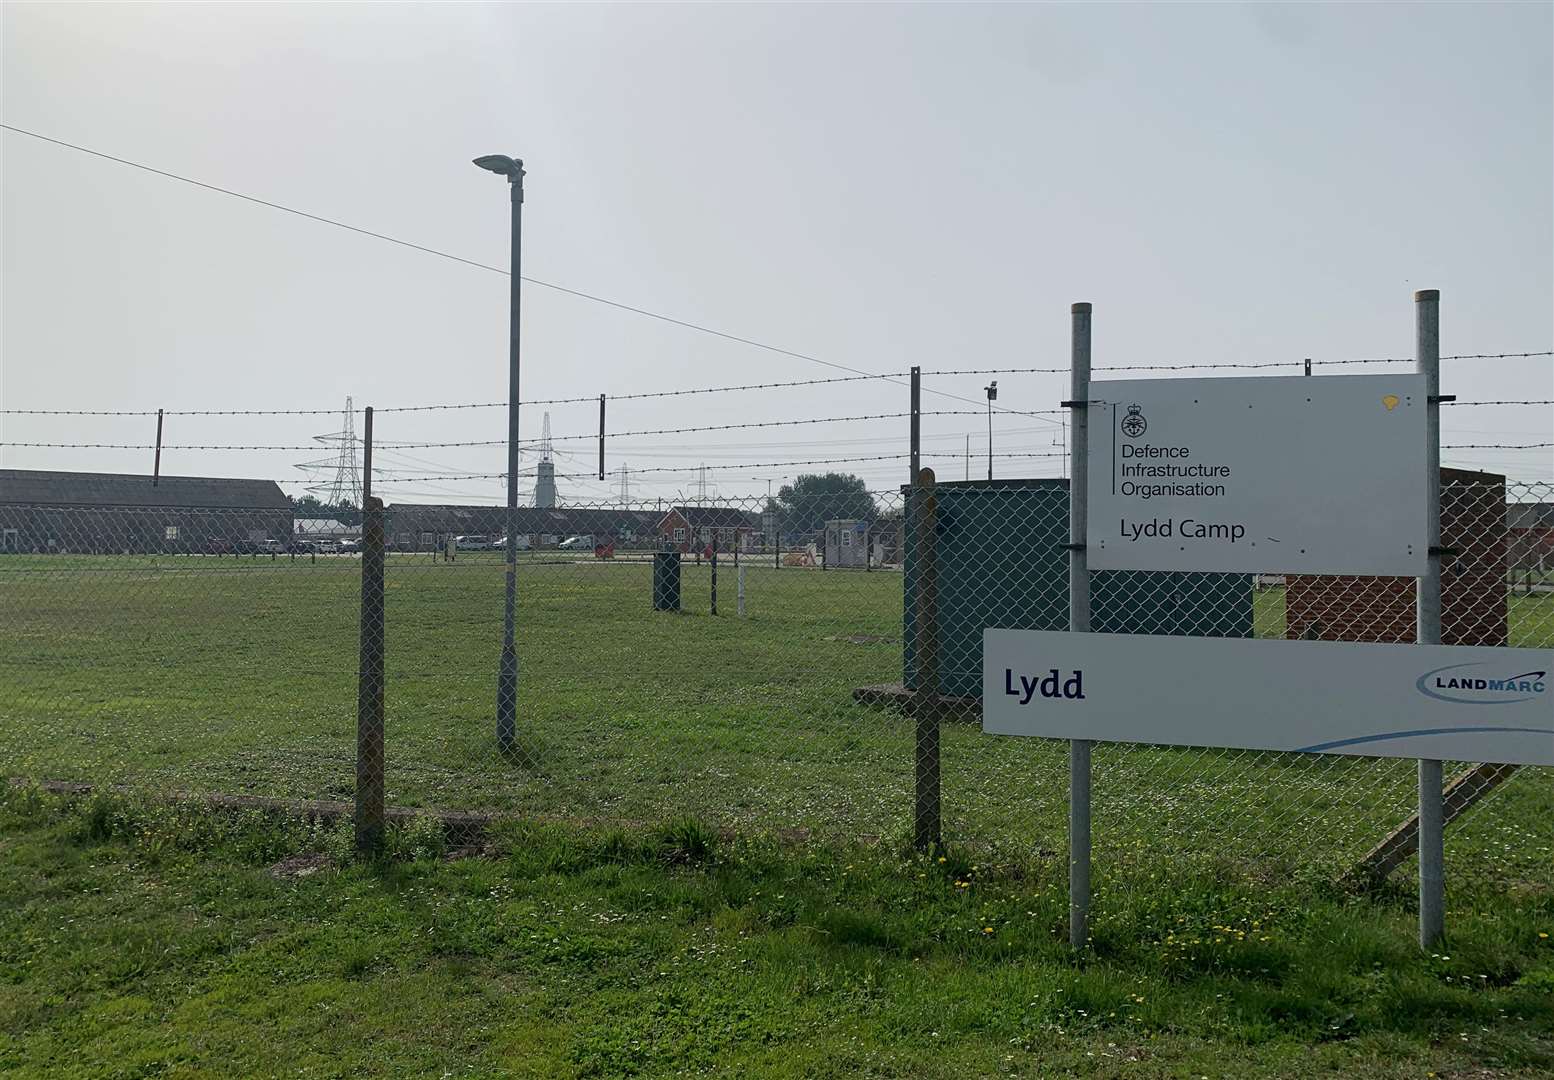 The camp is in Tourney Road, Lydd in Romney Marsh